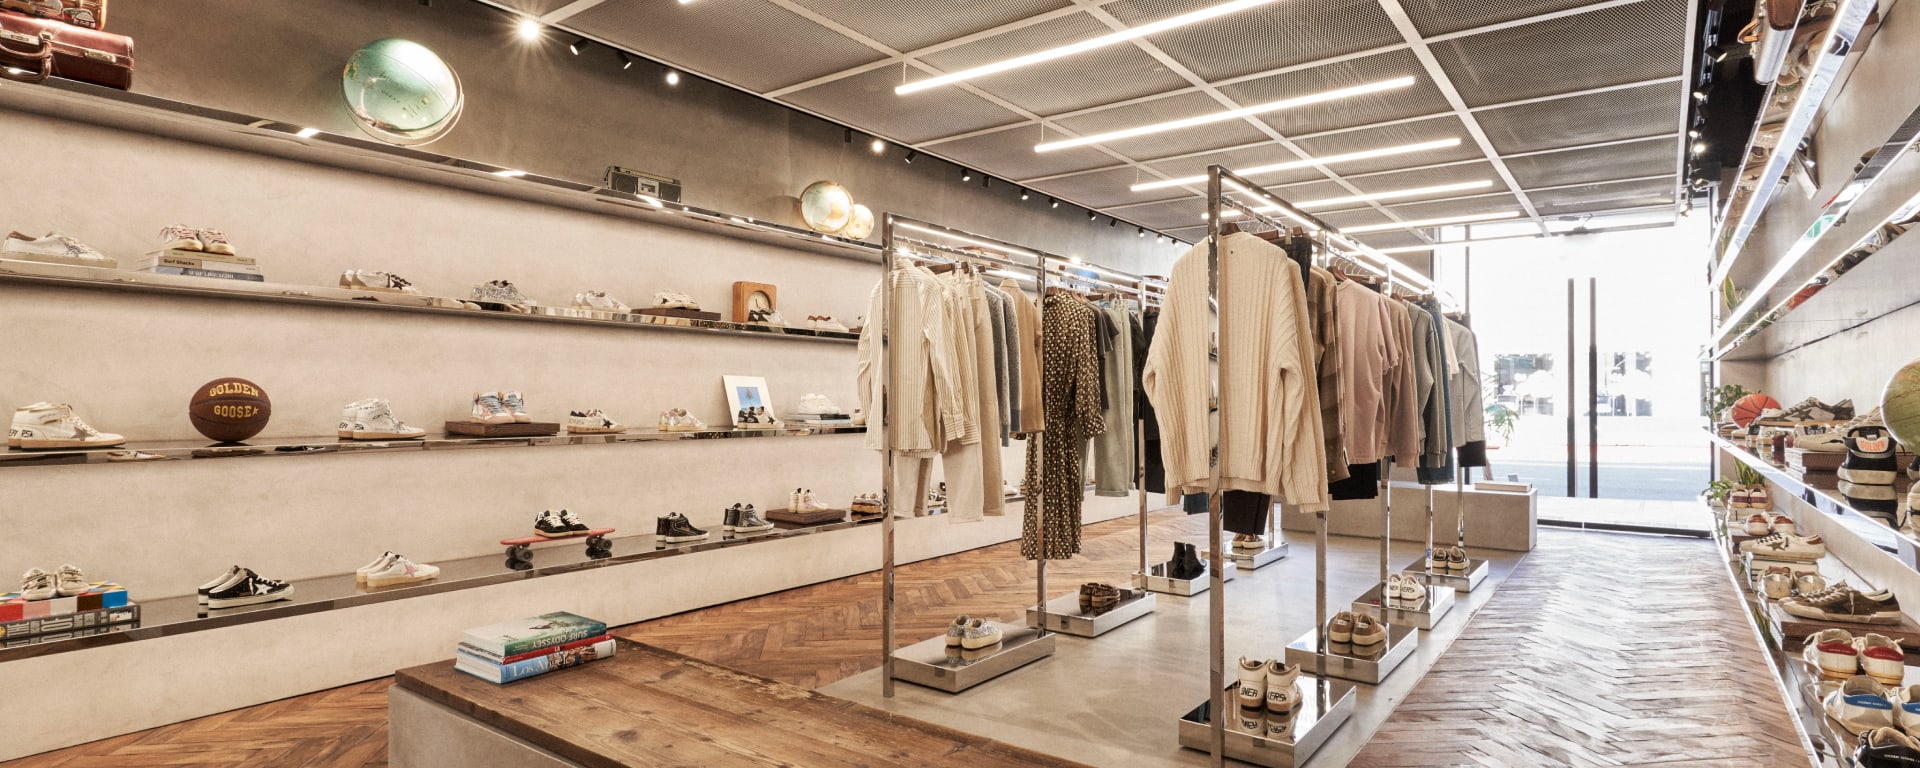 Golden Goose LOS ANGELES FLAGSHIP STORE 2 of 3